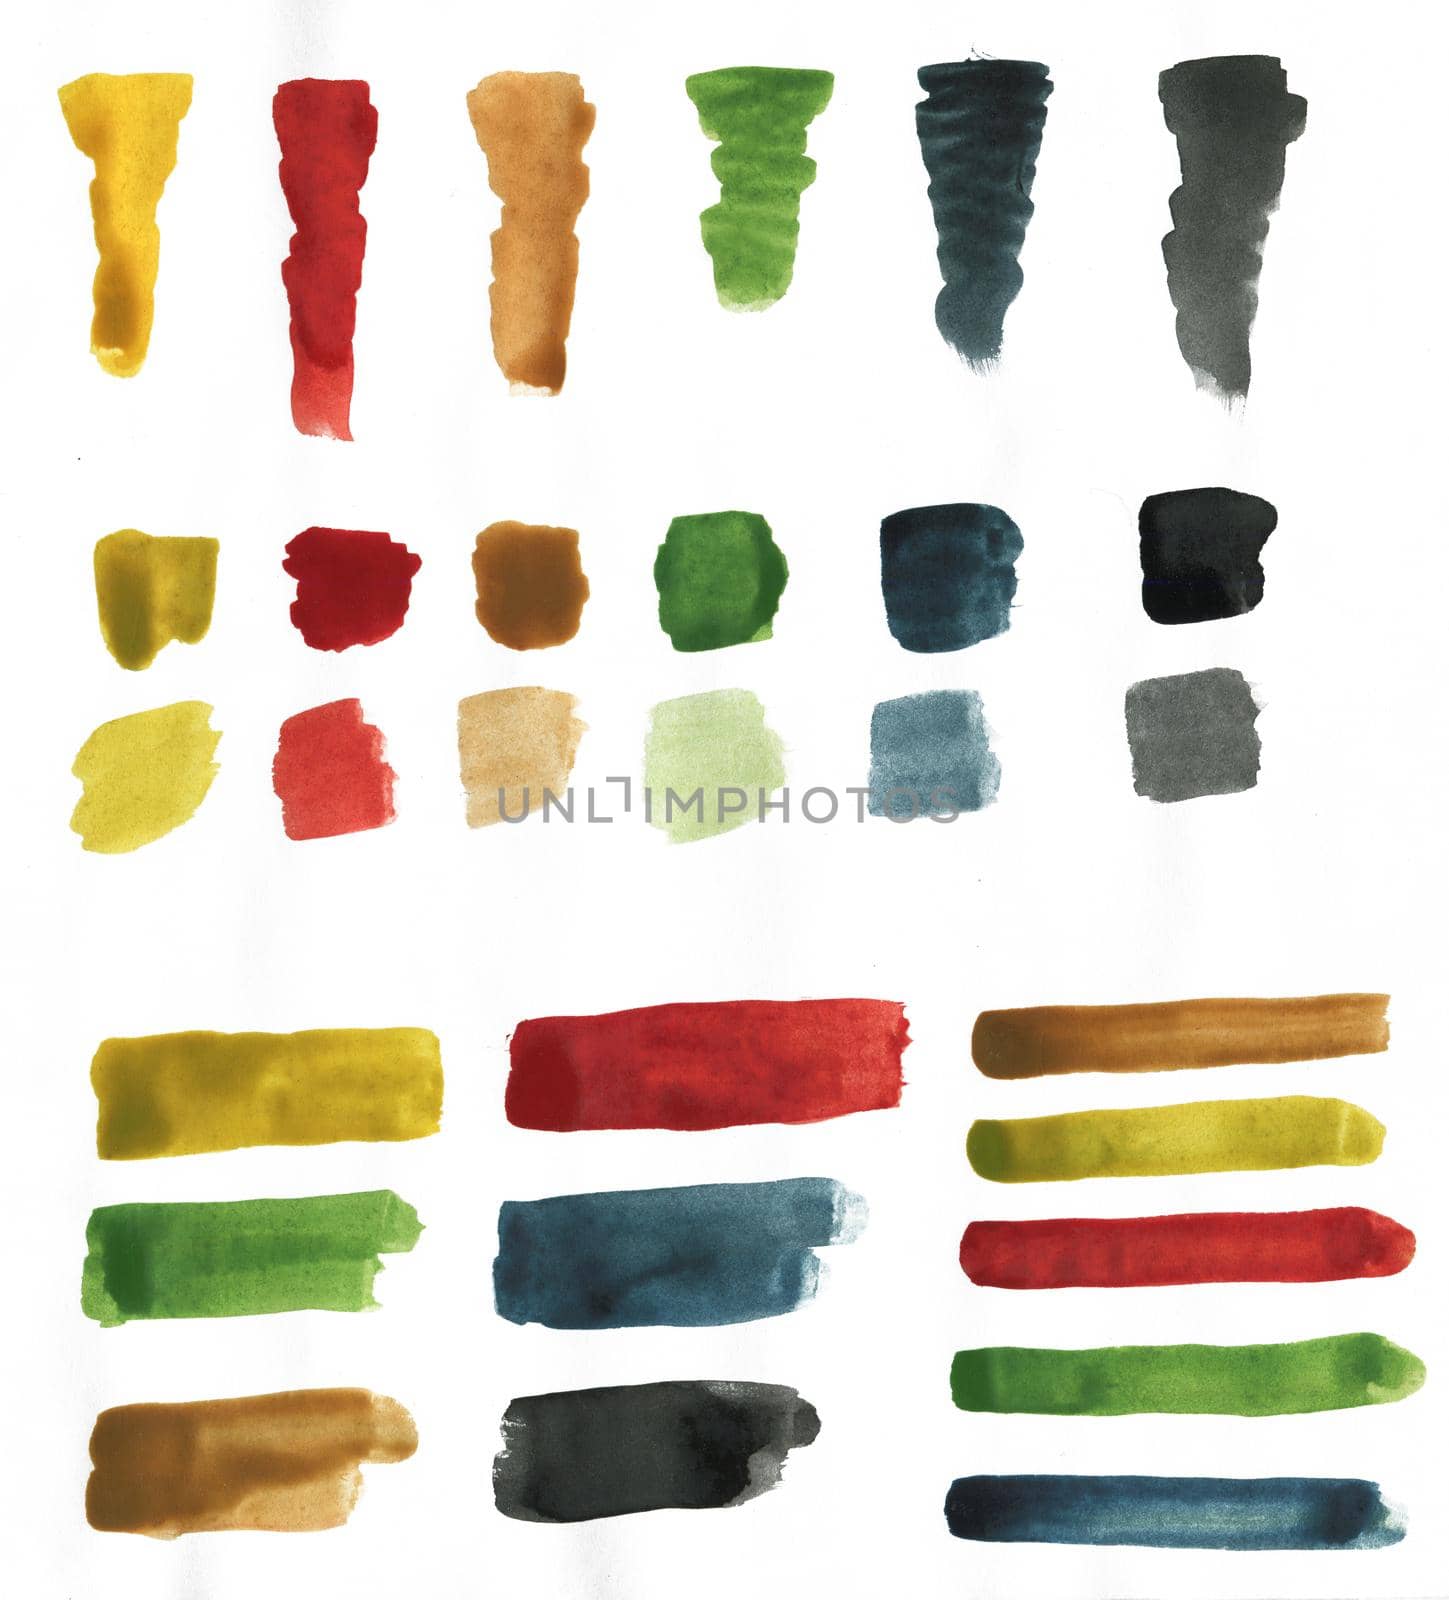 Illustration of Set of Brush Strokes and Stains of Multicolored Watercolor of Various Sizes and Shapes on White Background.